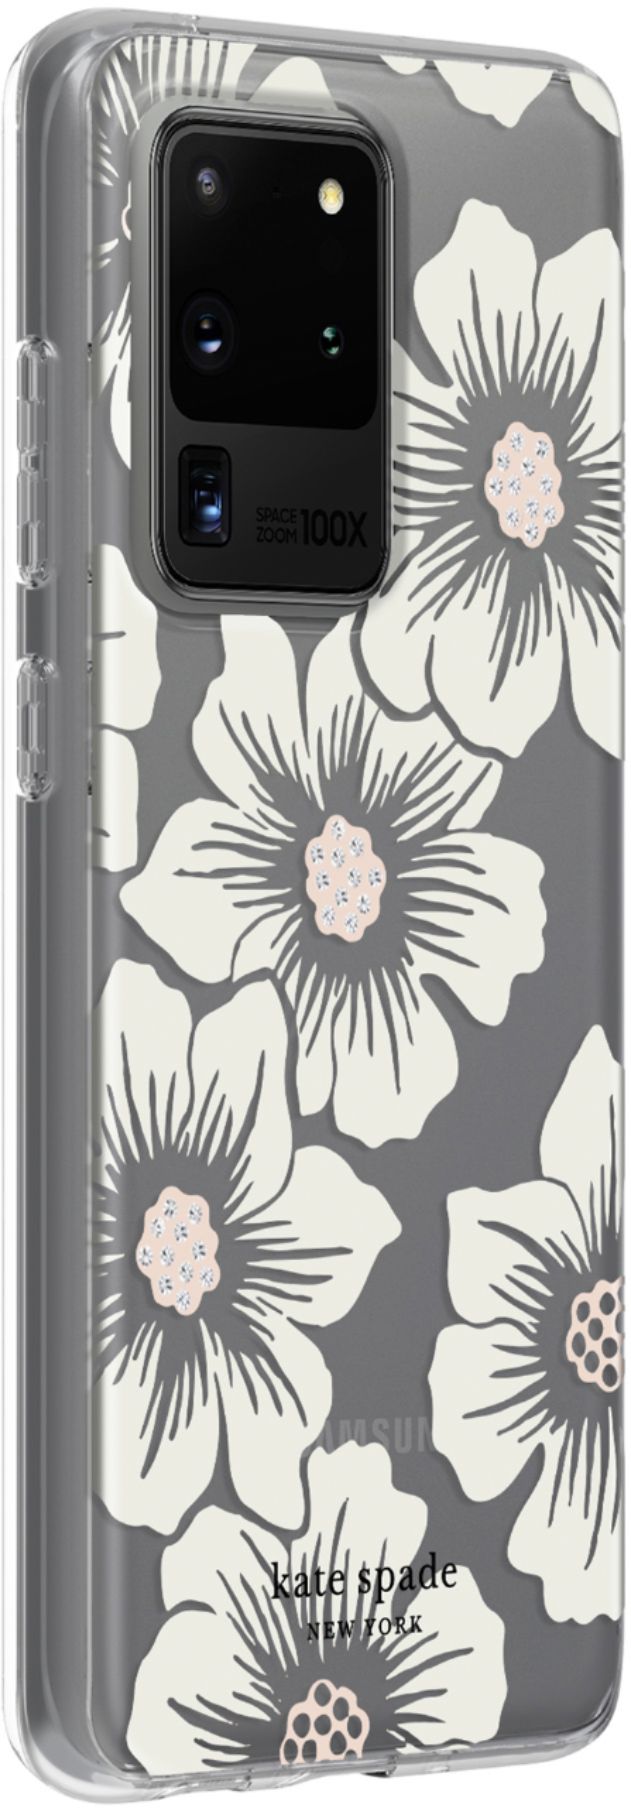 Angle View: kate spade new york - Protective Hard-Shell Case for Samsung Galaxy S20 Ultra 5G - Hollyhock Floral Clear/Cream With Stones